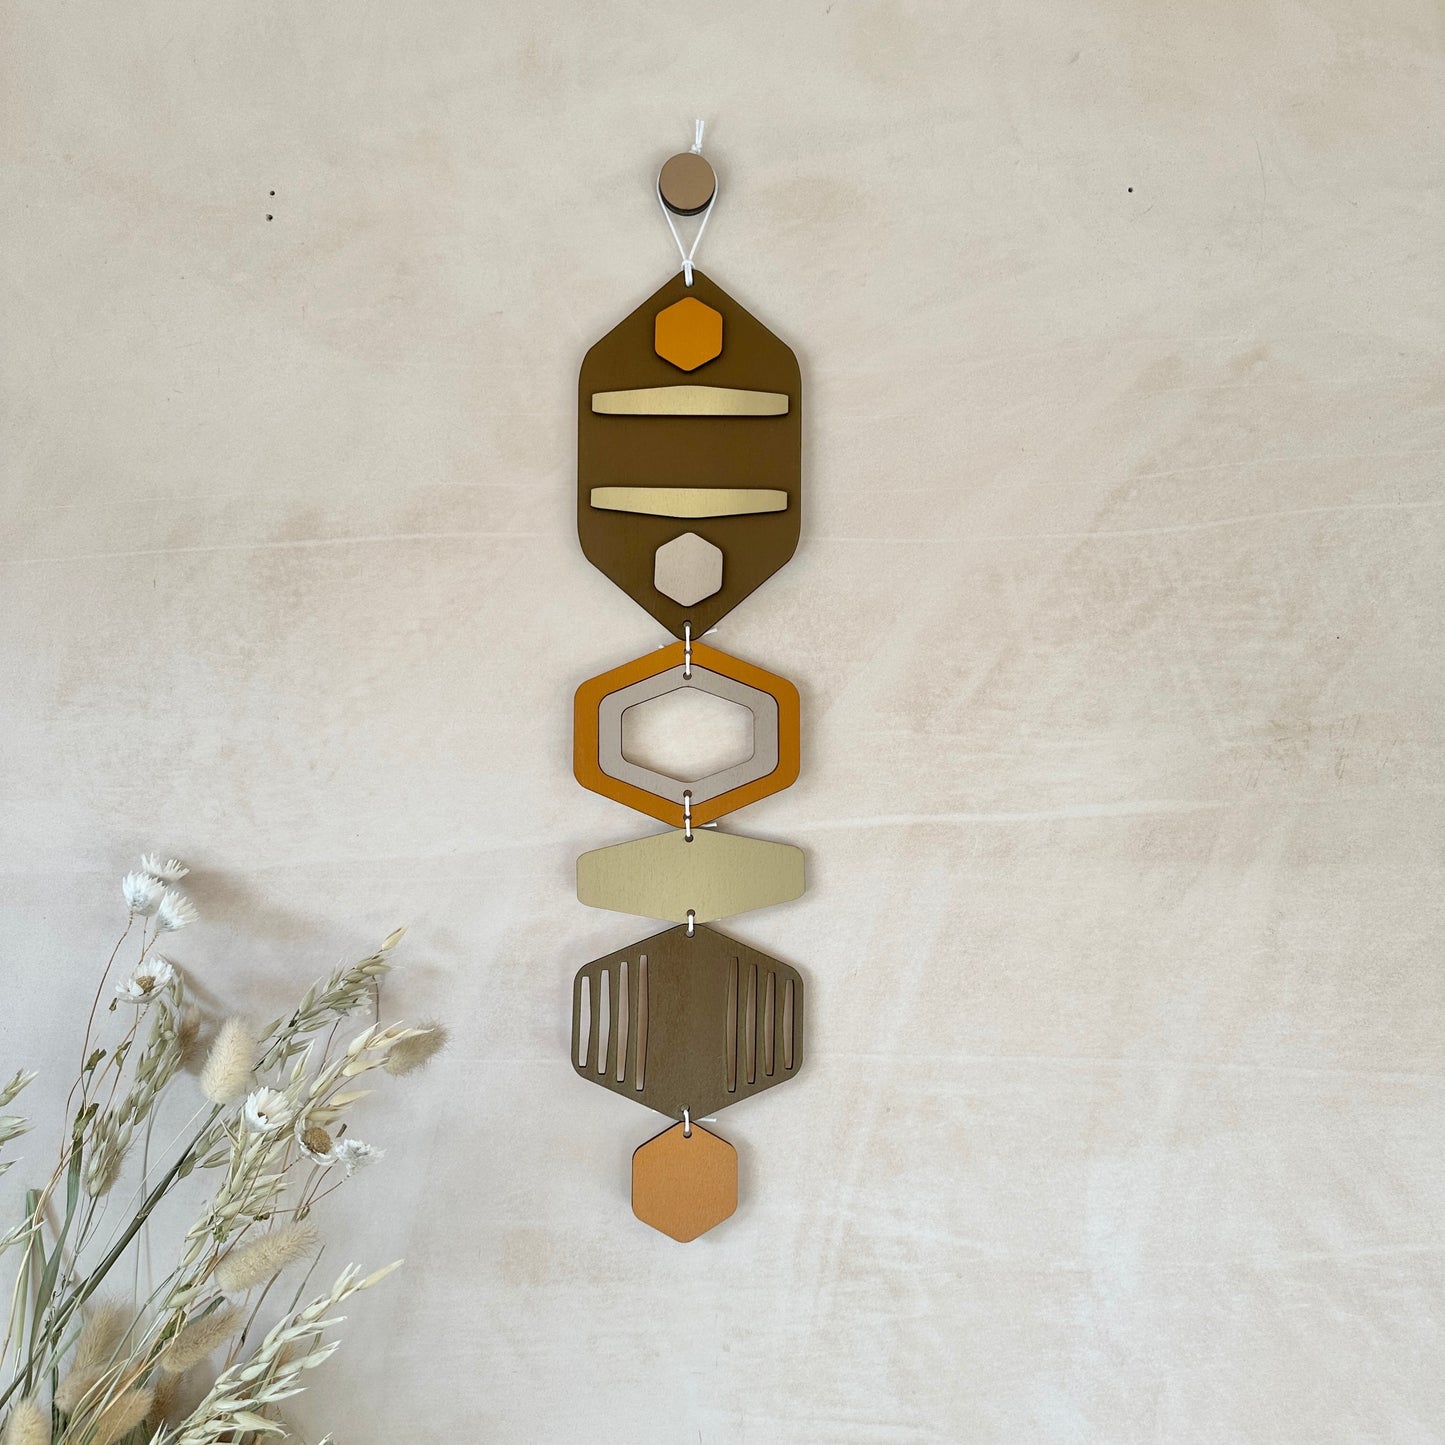 Hexagon Wall Hanging - Brown Wall Art - Hand Painted Art - Home Gift For Him - New Home Decor Gift - Natural Wall Decor - New Home Gift